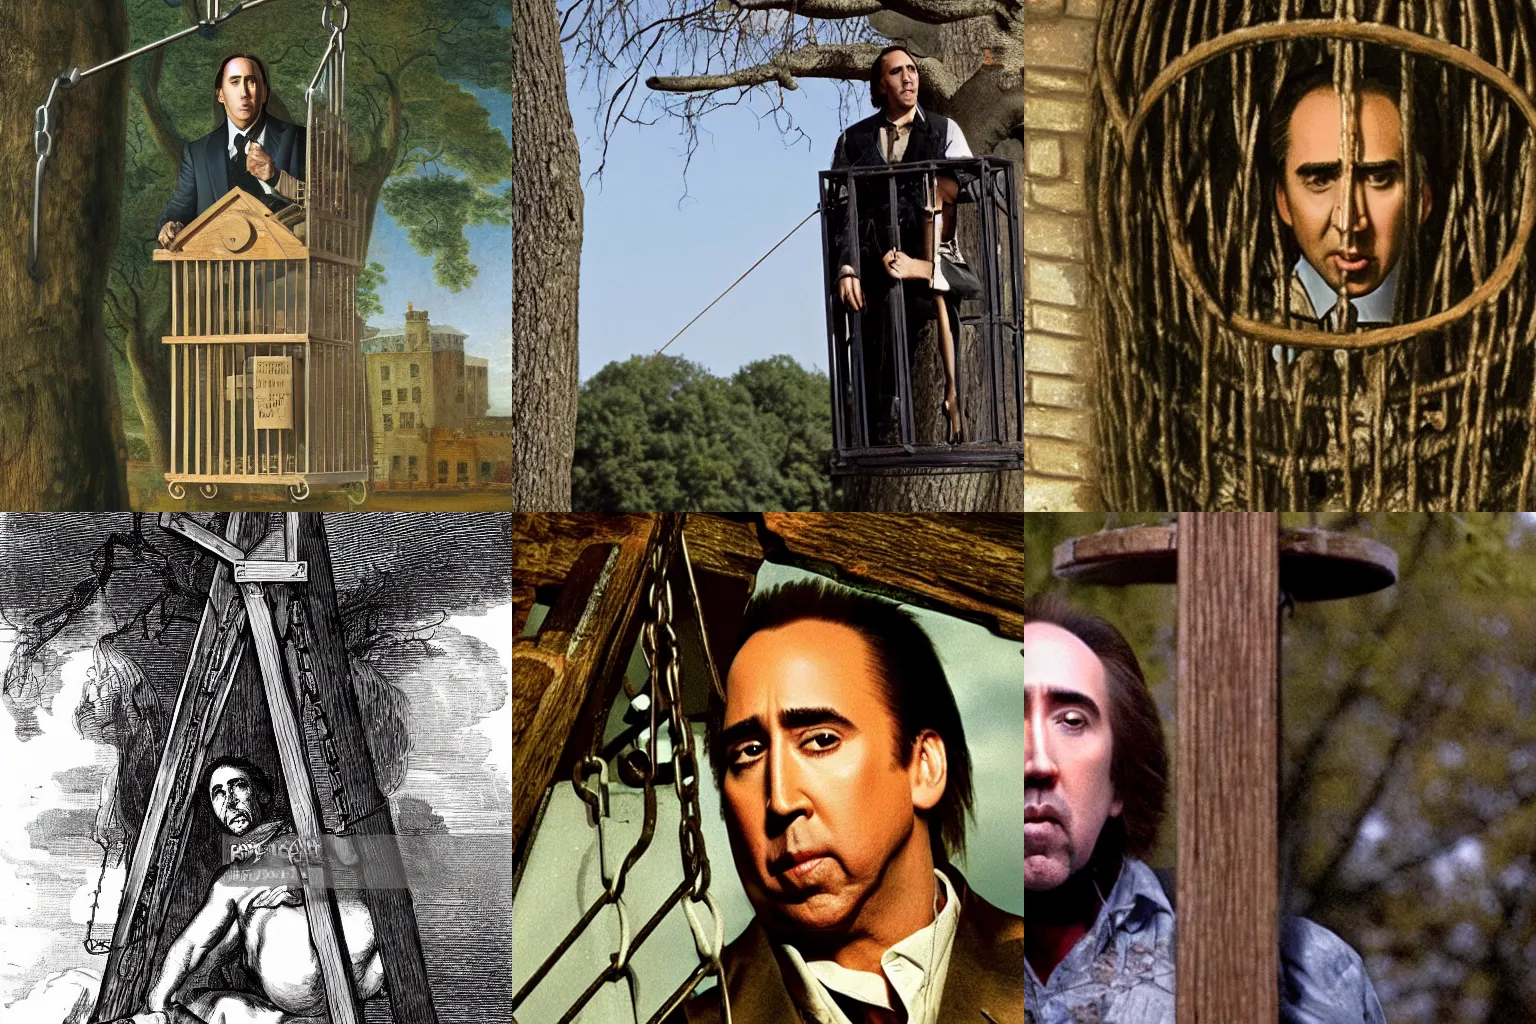 Prompt: Nicholas Cage imprisoned inside a gibbet hanging from an oak tree